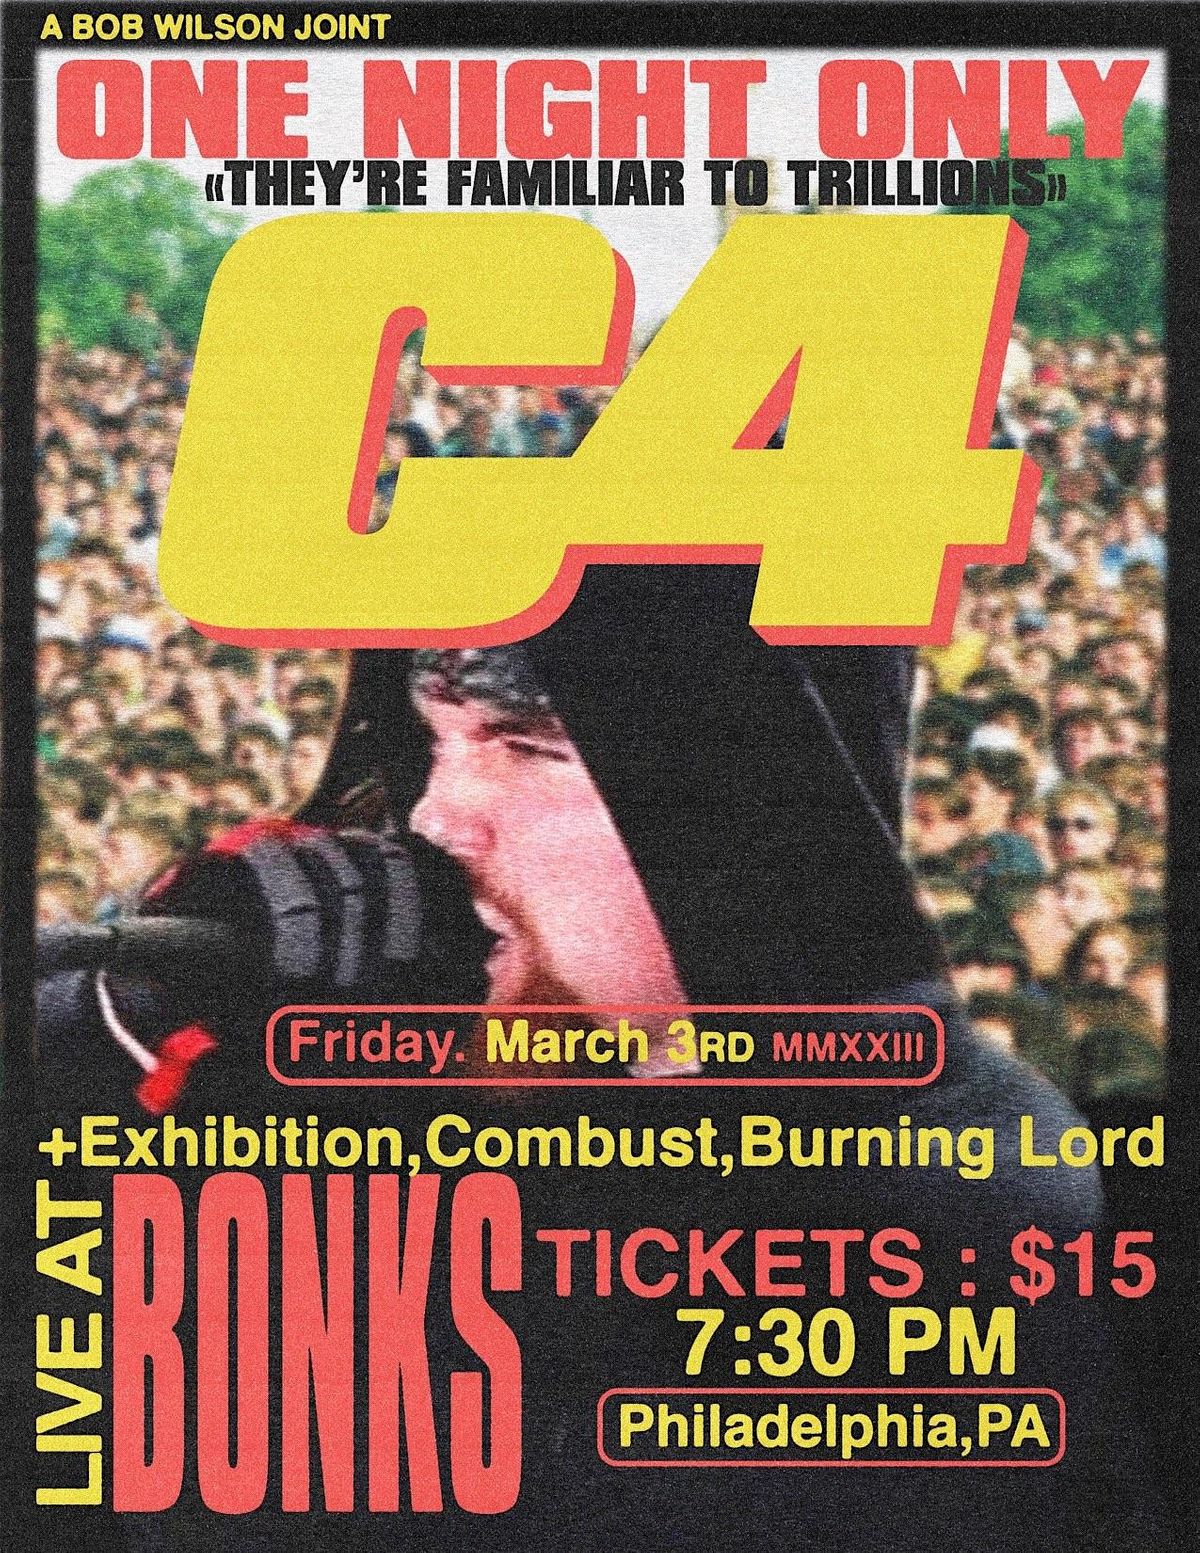 C4 LIVE AT BONKS W\/COMBUST EXHIBITION AND BURNING LORD